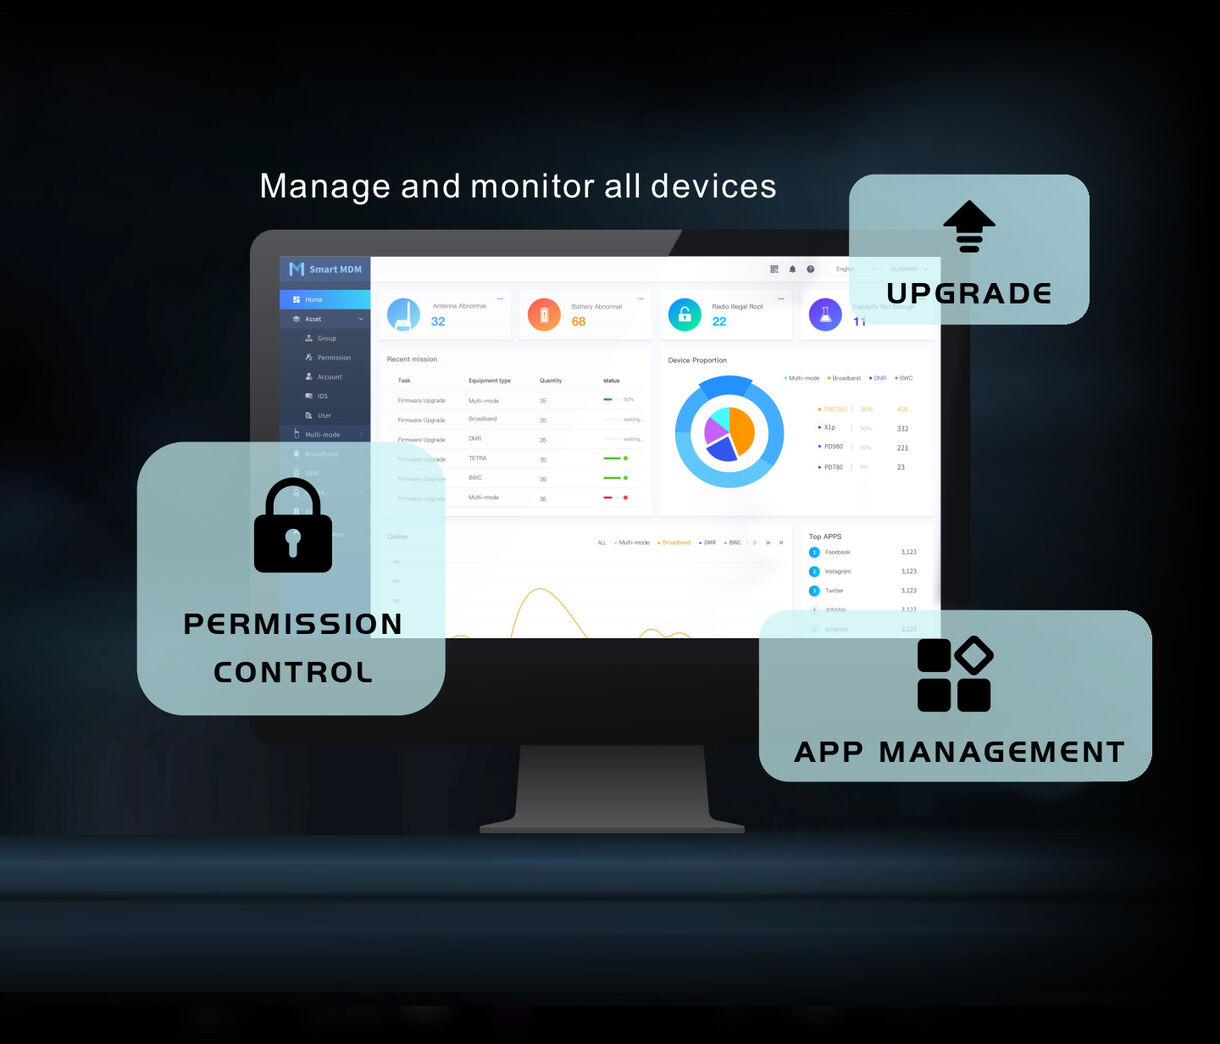 Manage and monitor